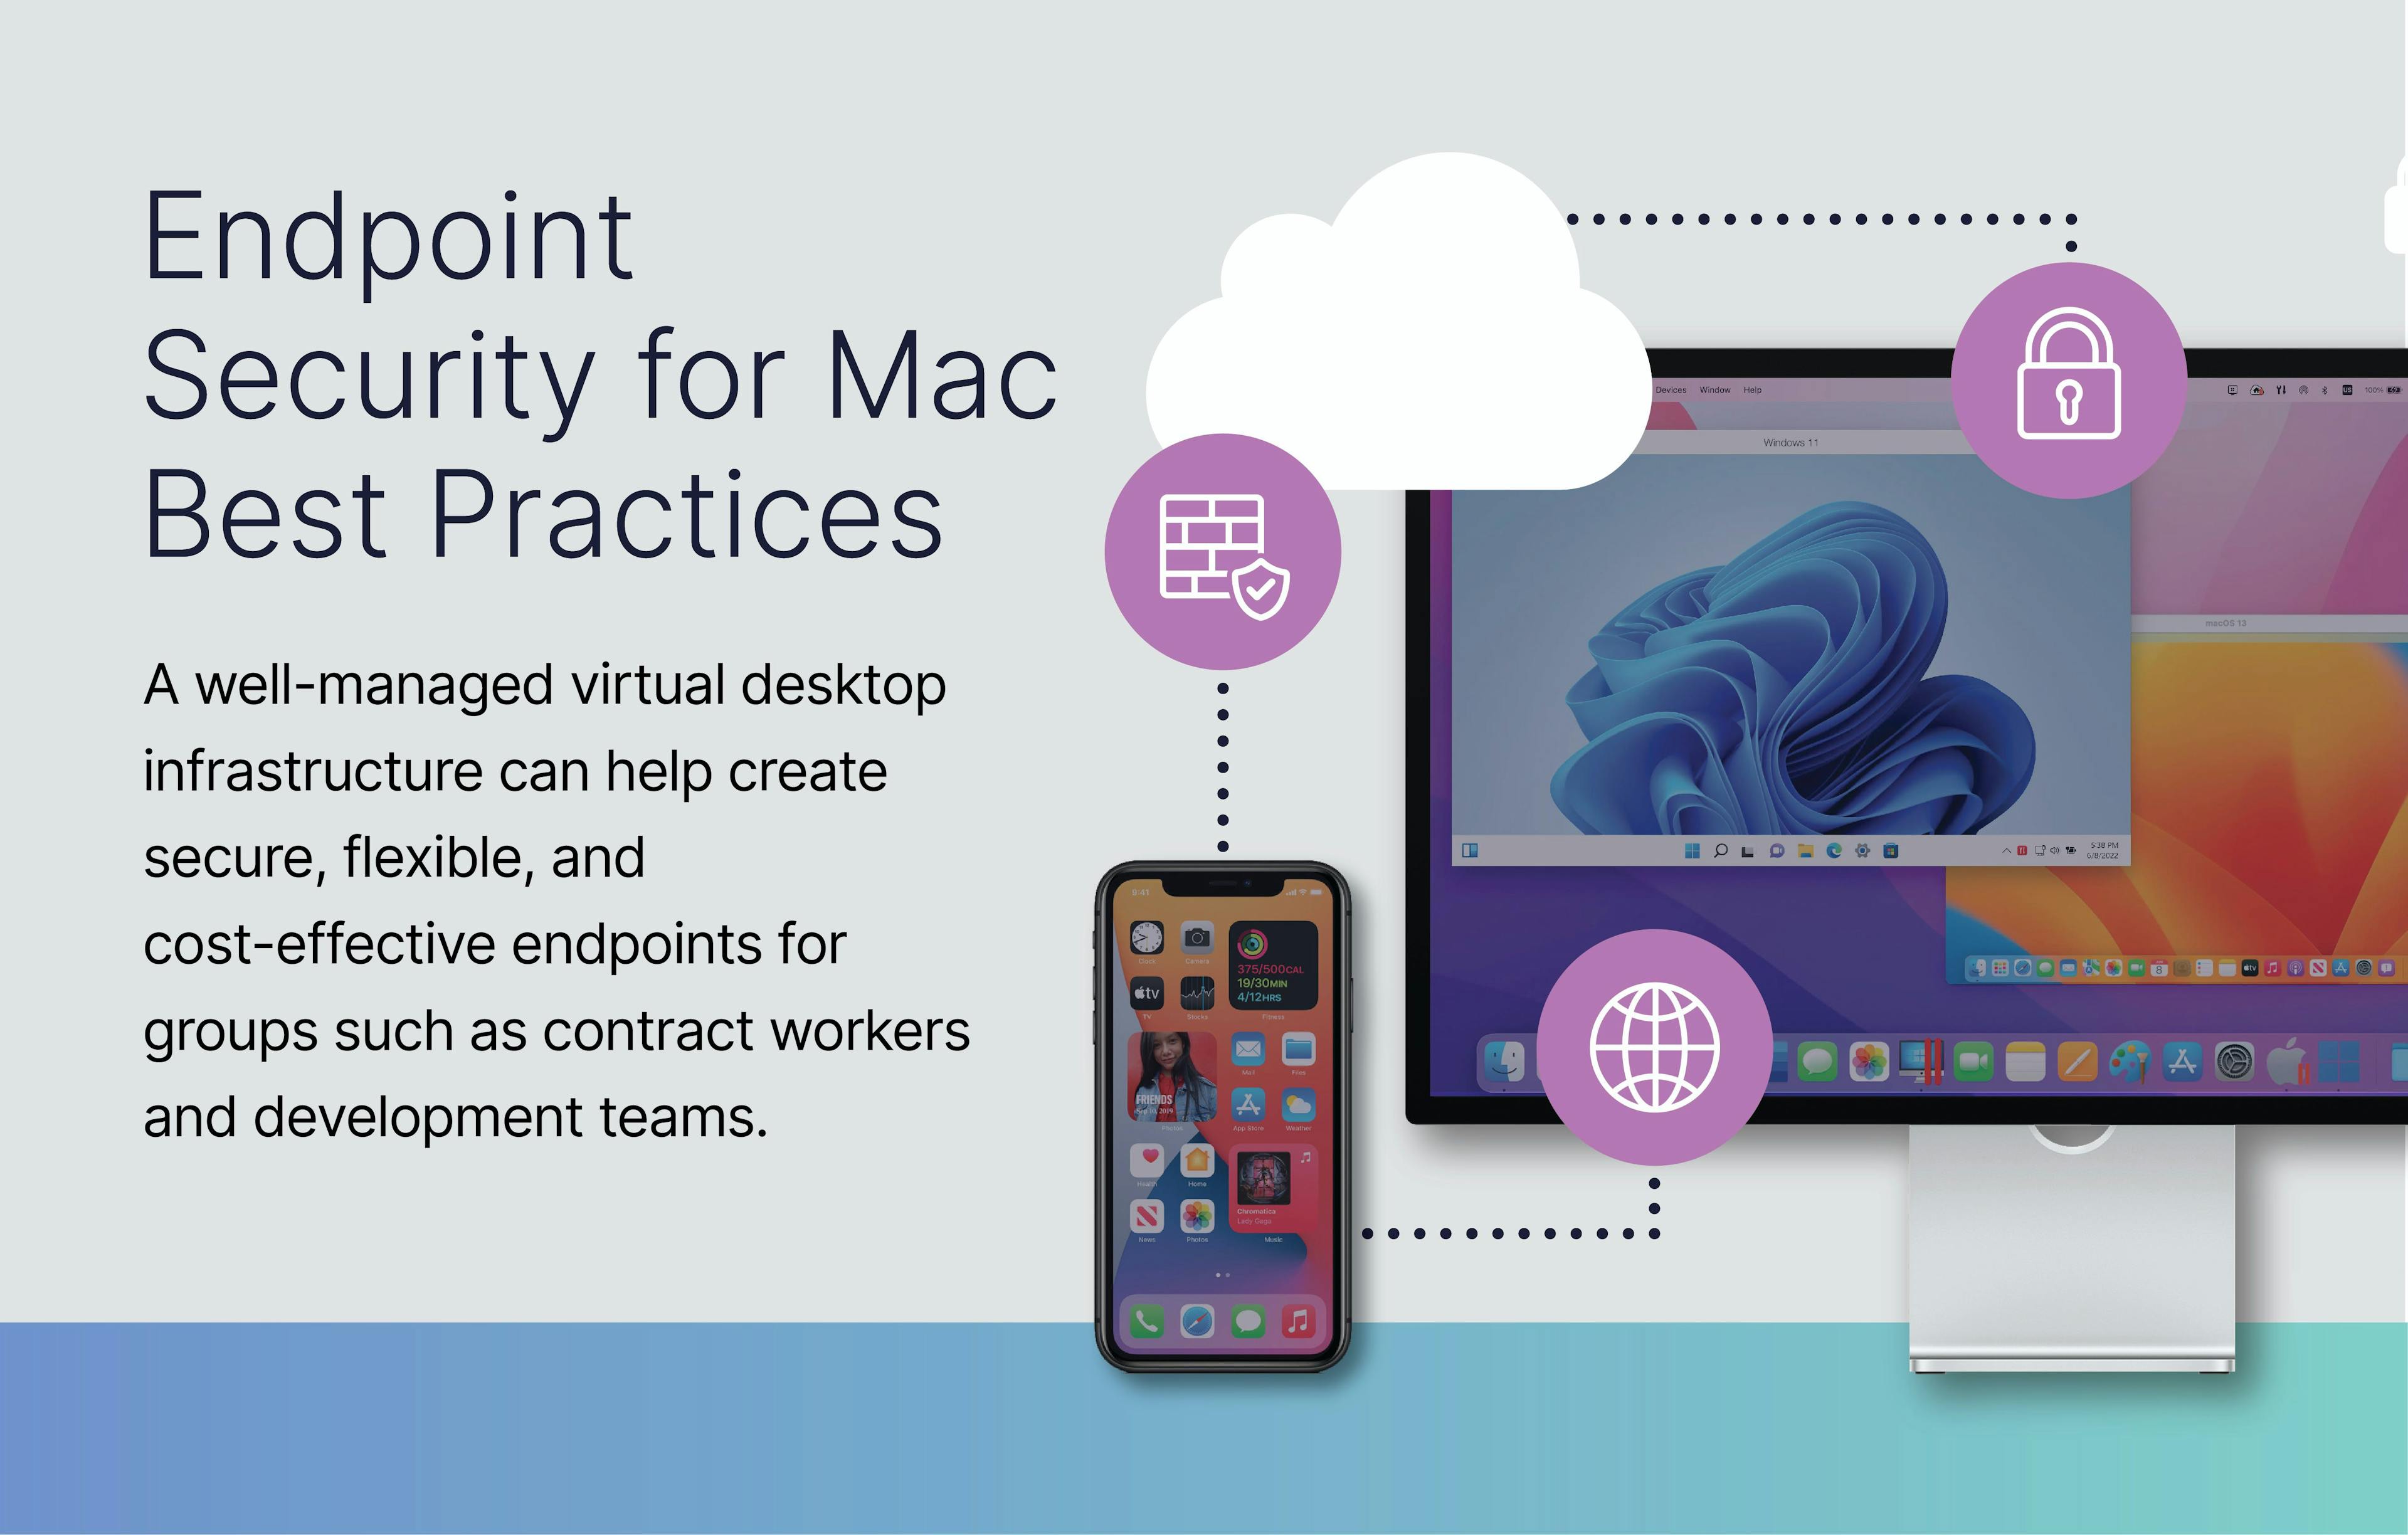 Endpoint Security for Mac Best Practices